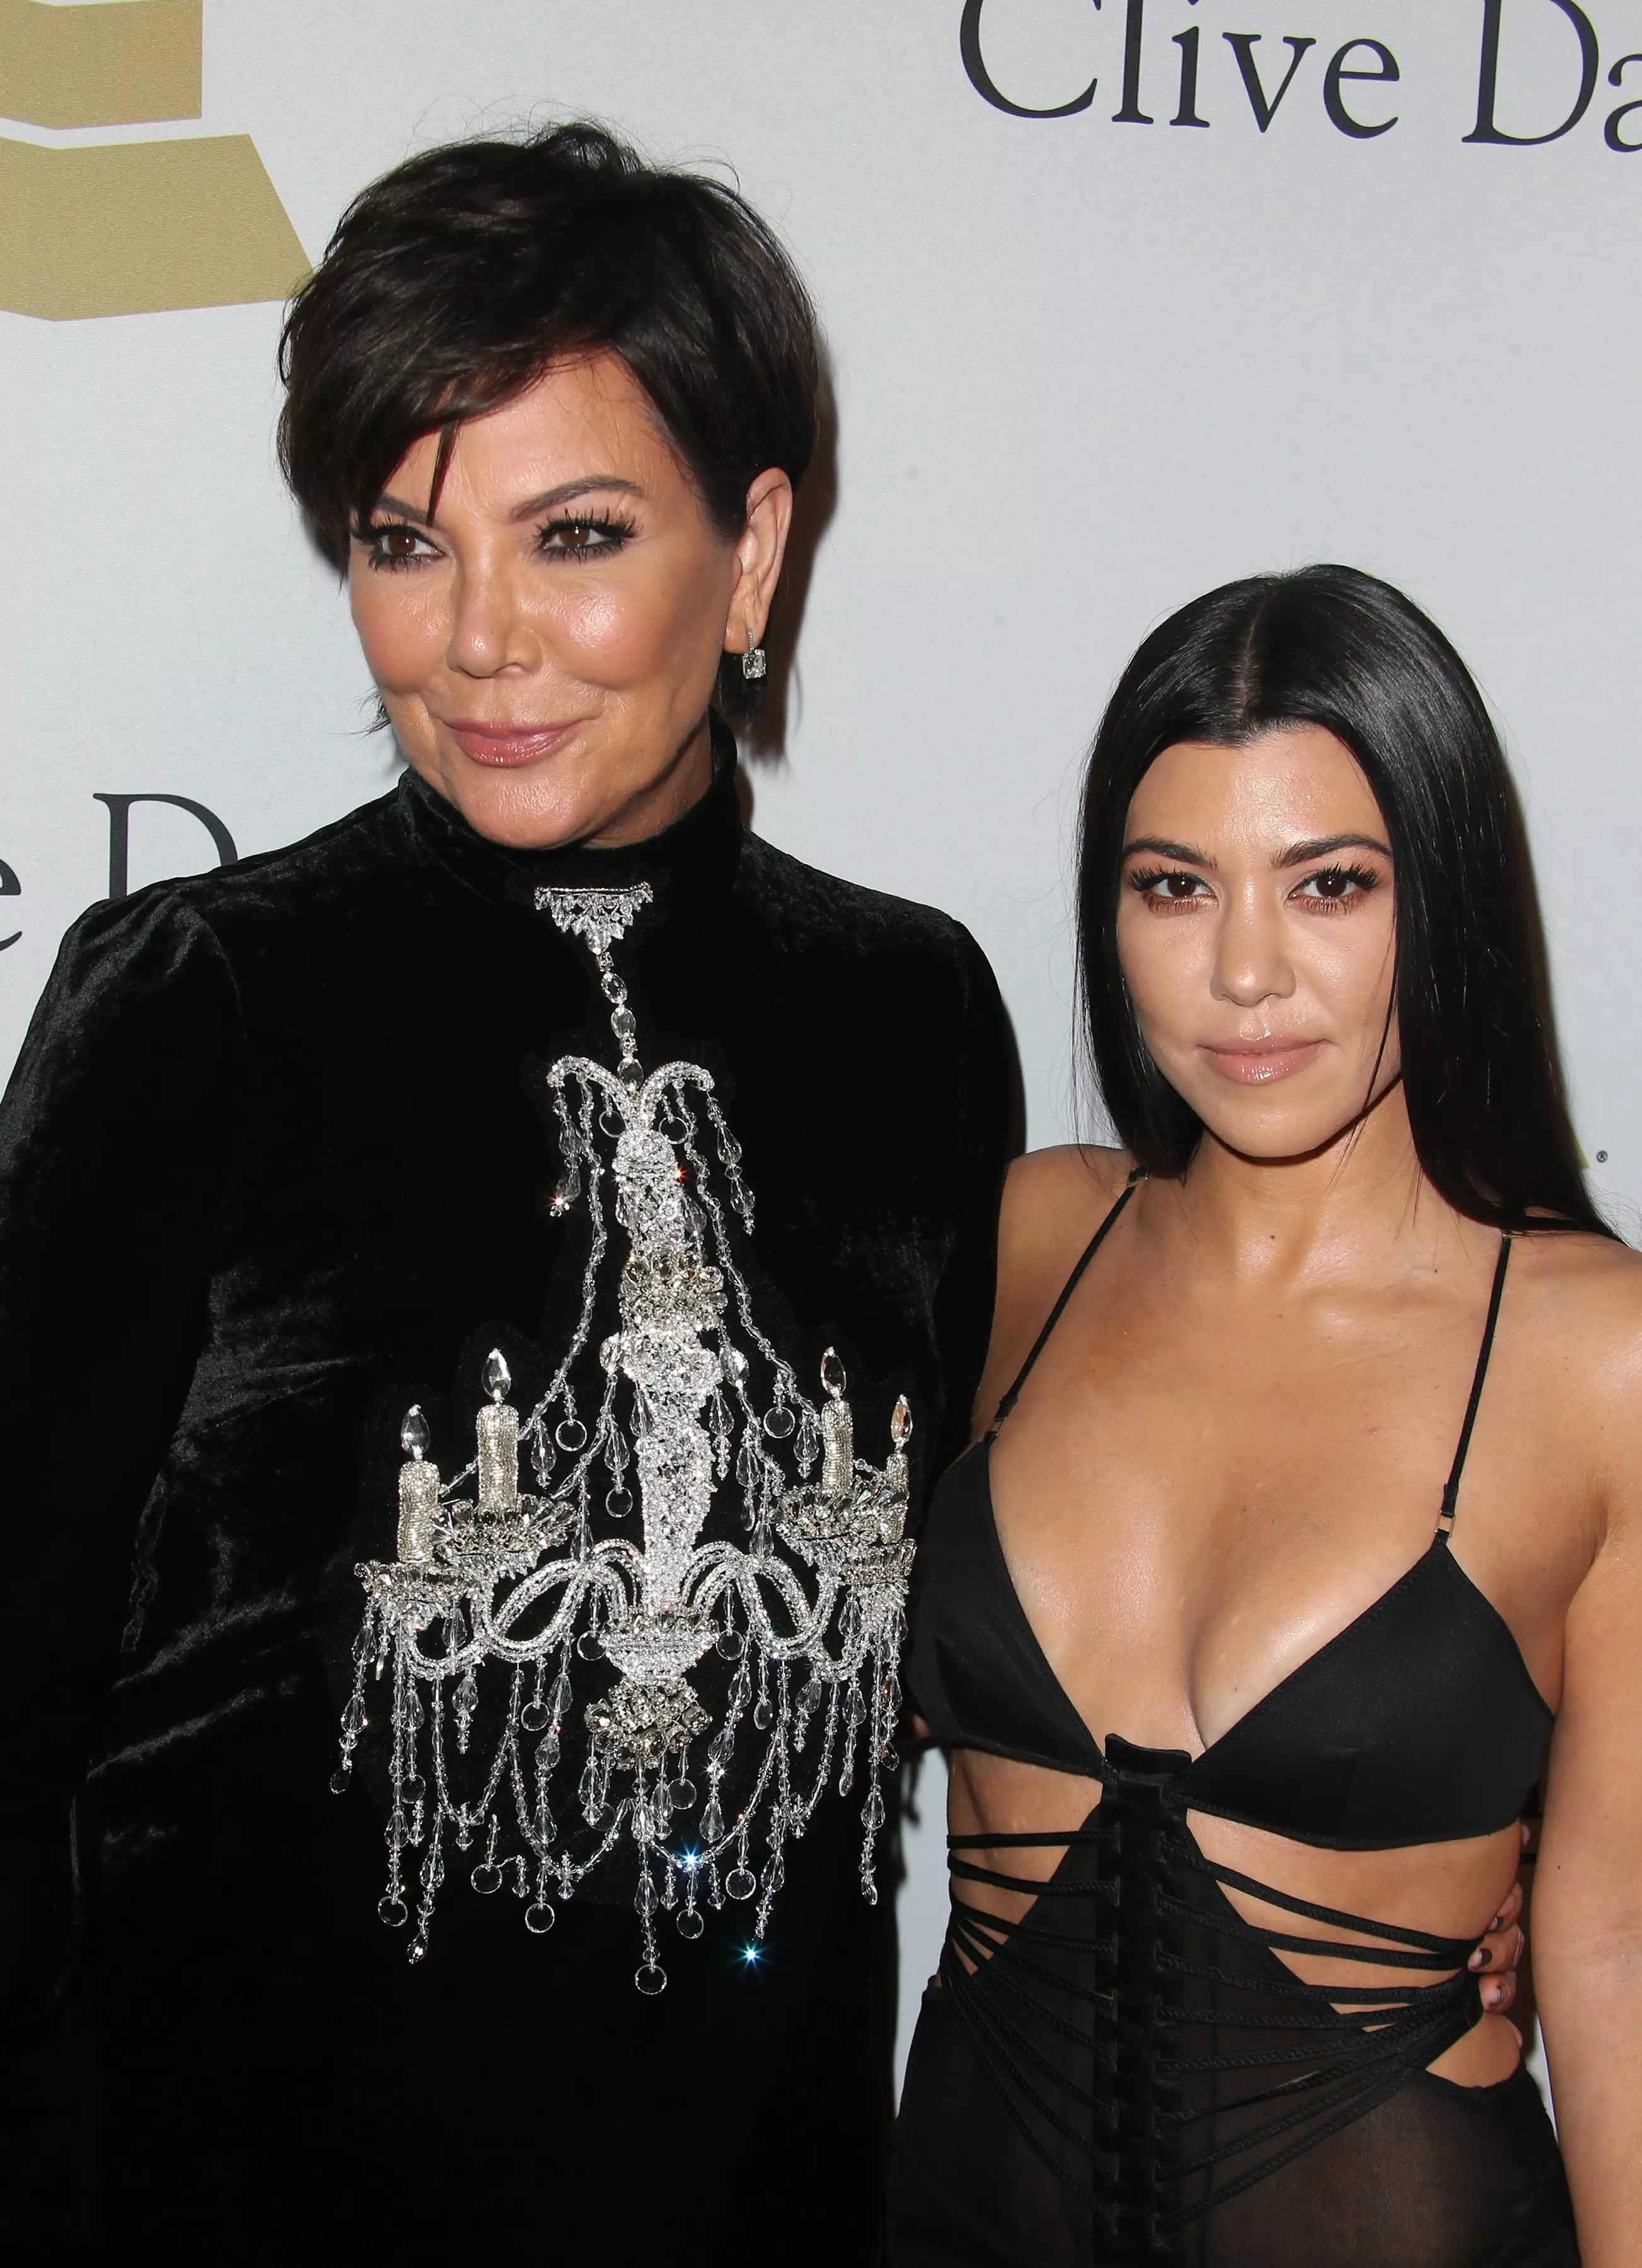 Kris and Kourtney have categorically denied the claims (